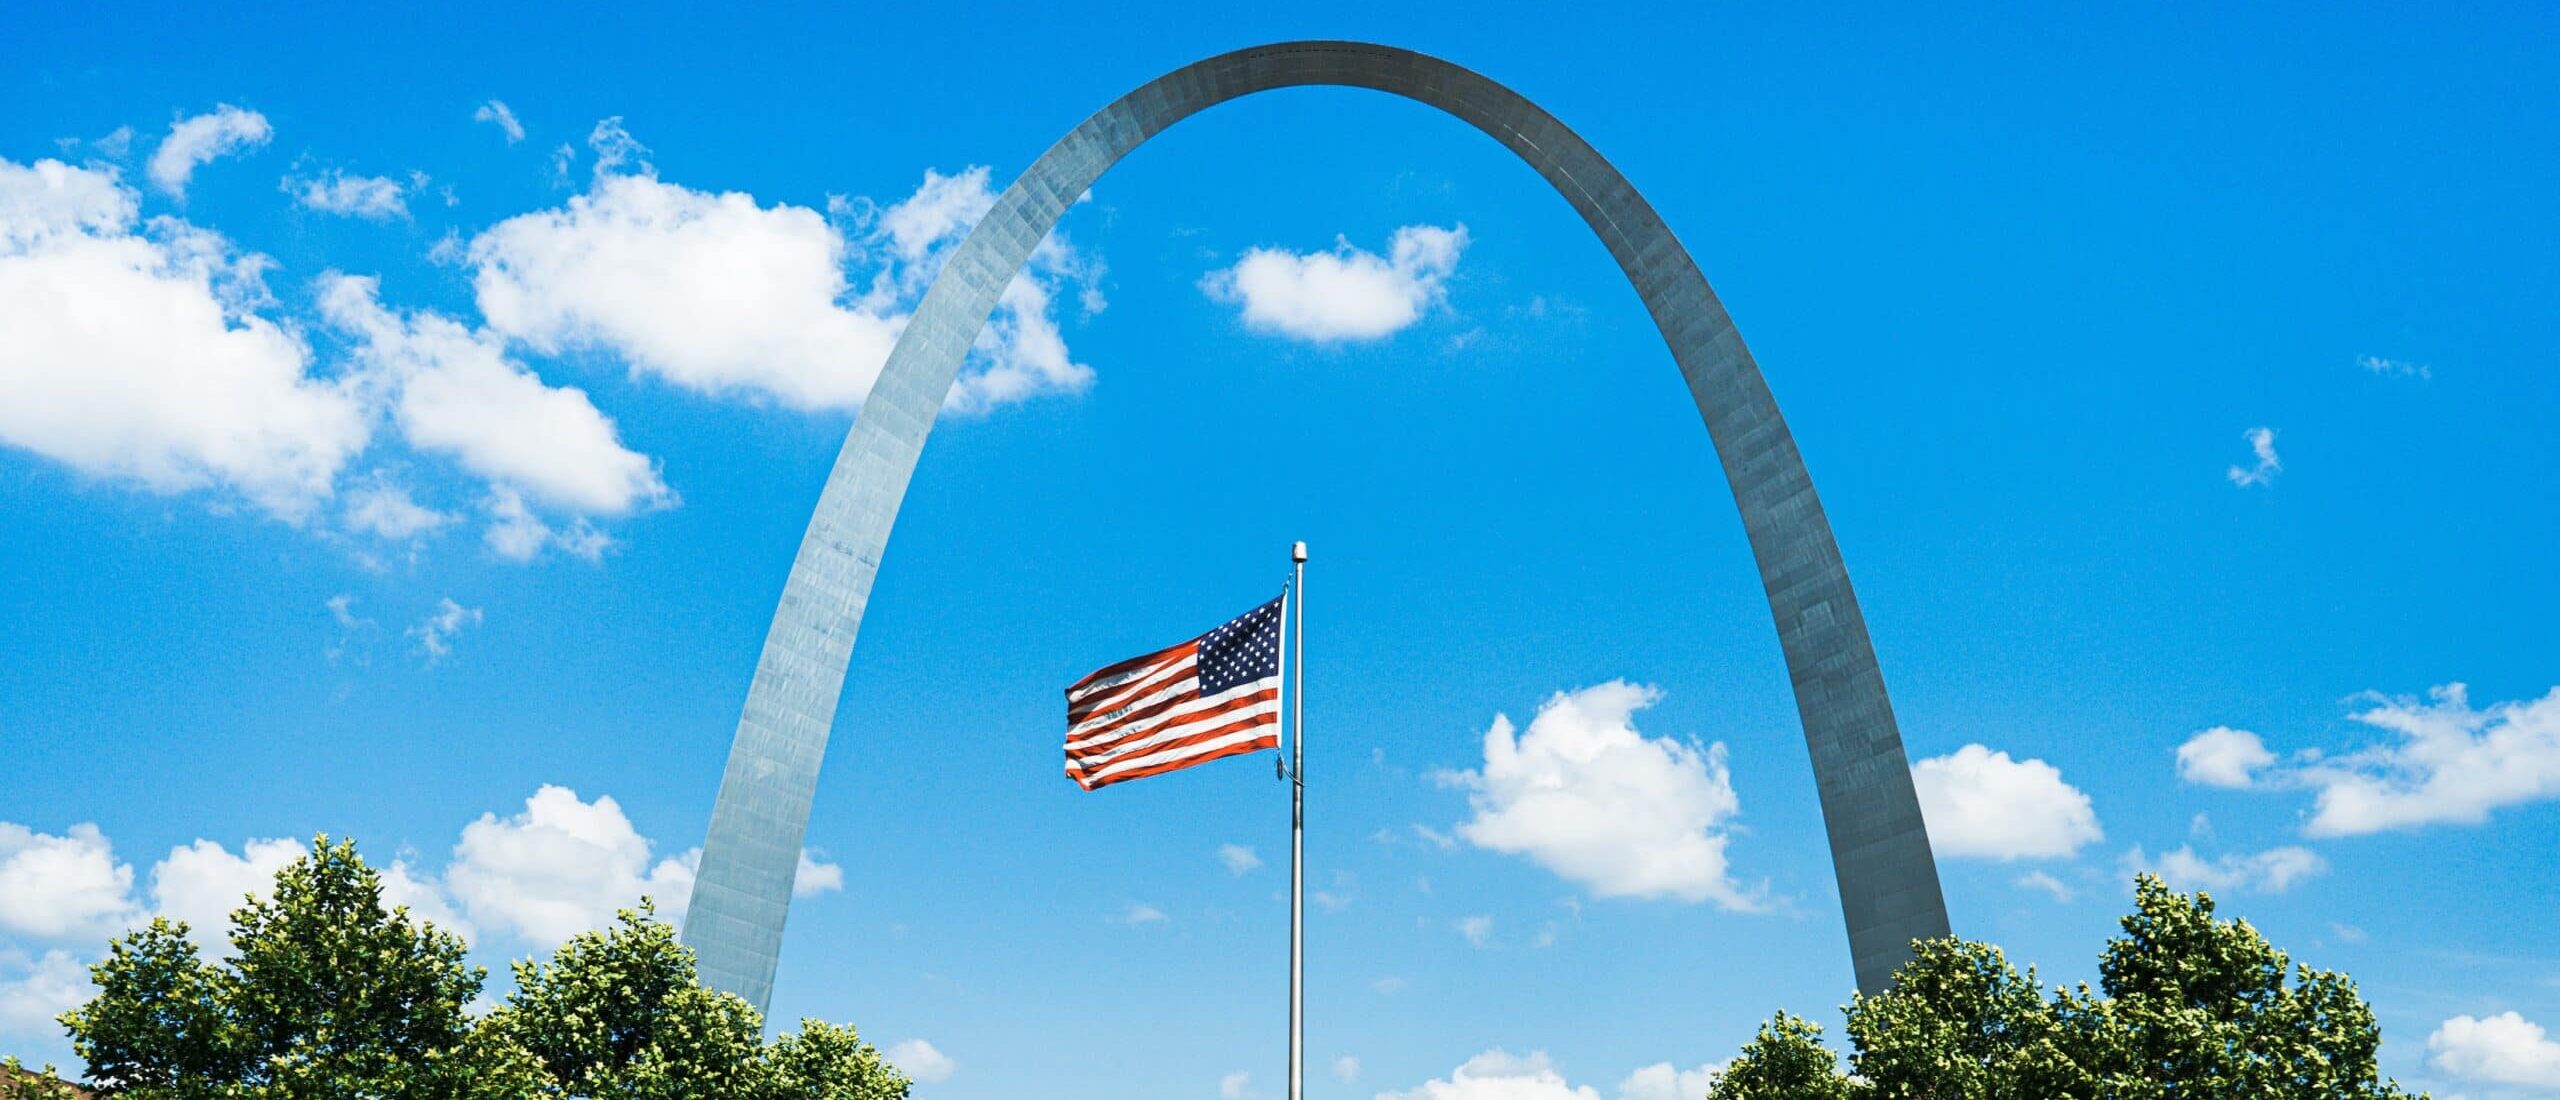 St. Louis is NGA's gateway to the world and the future